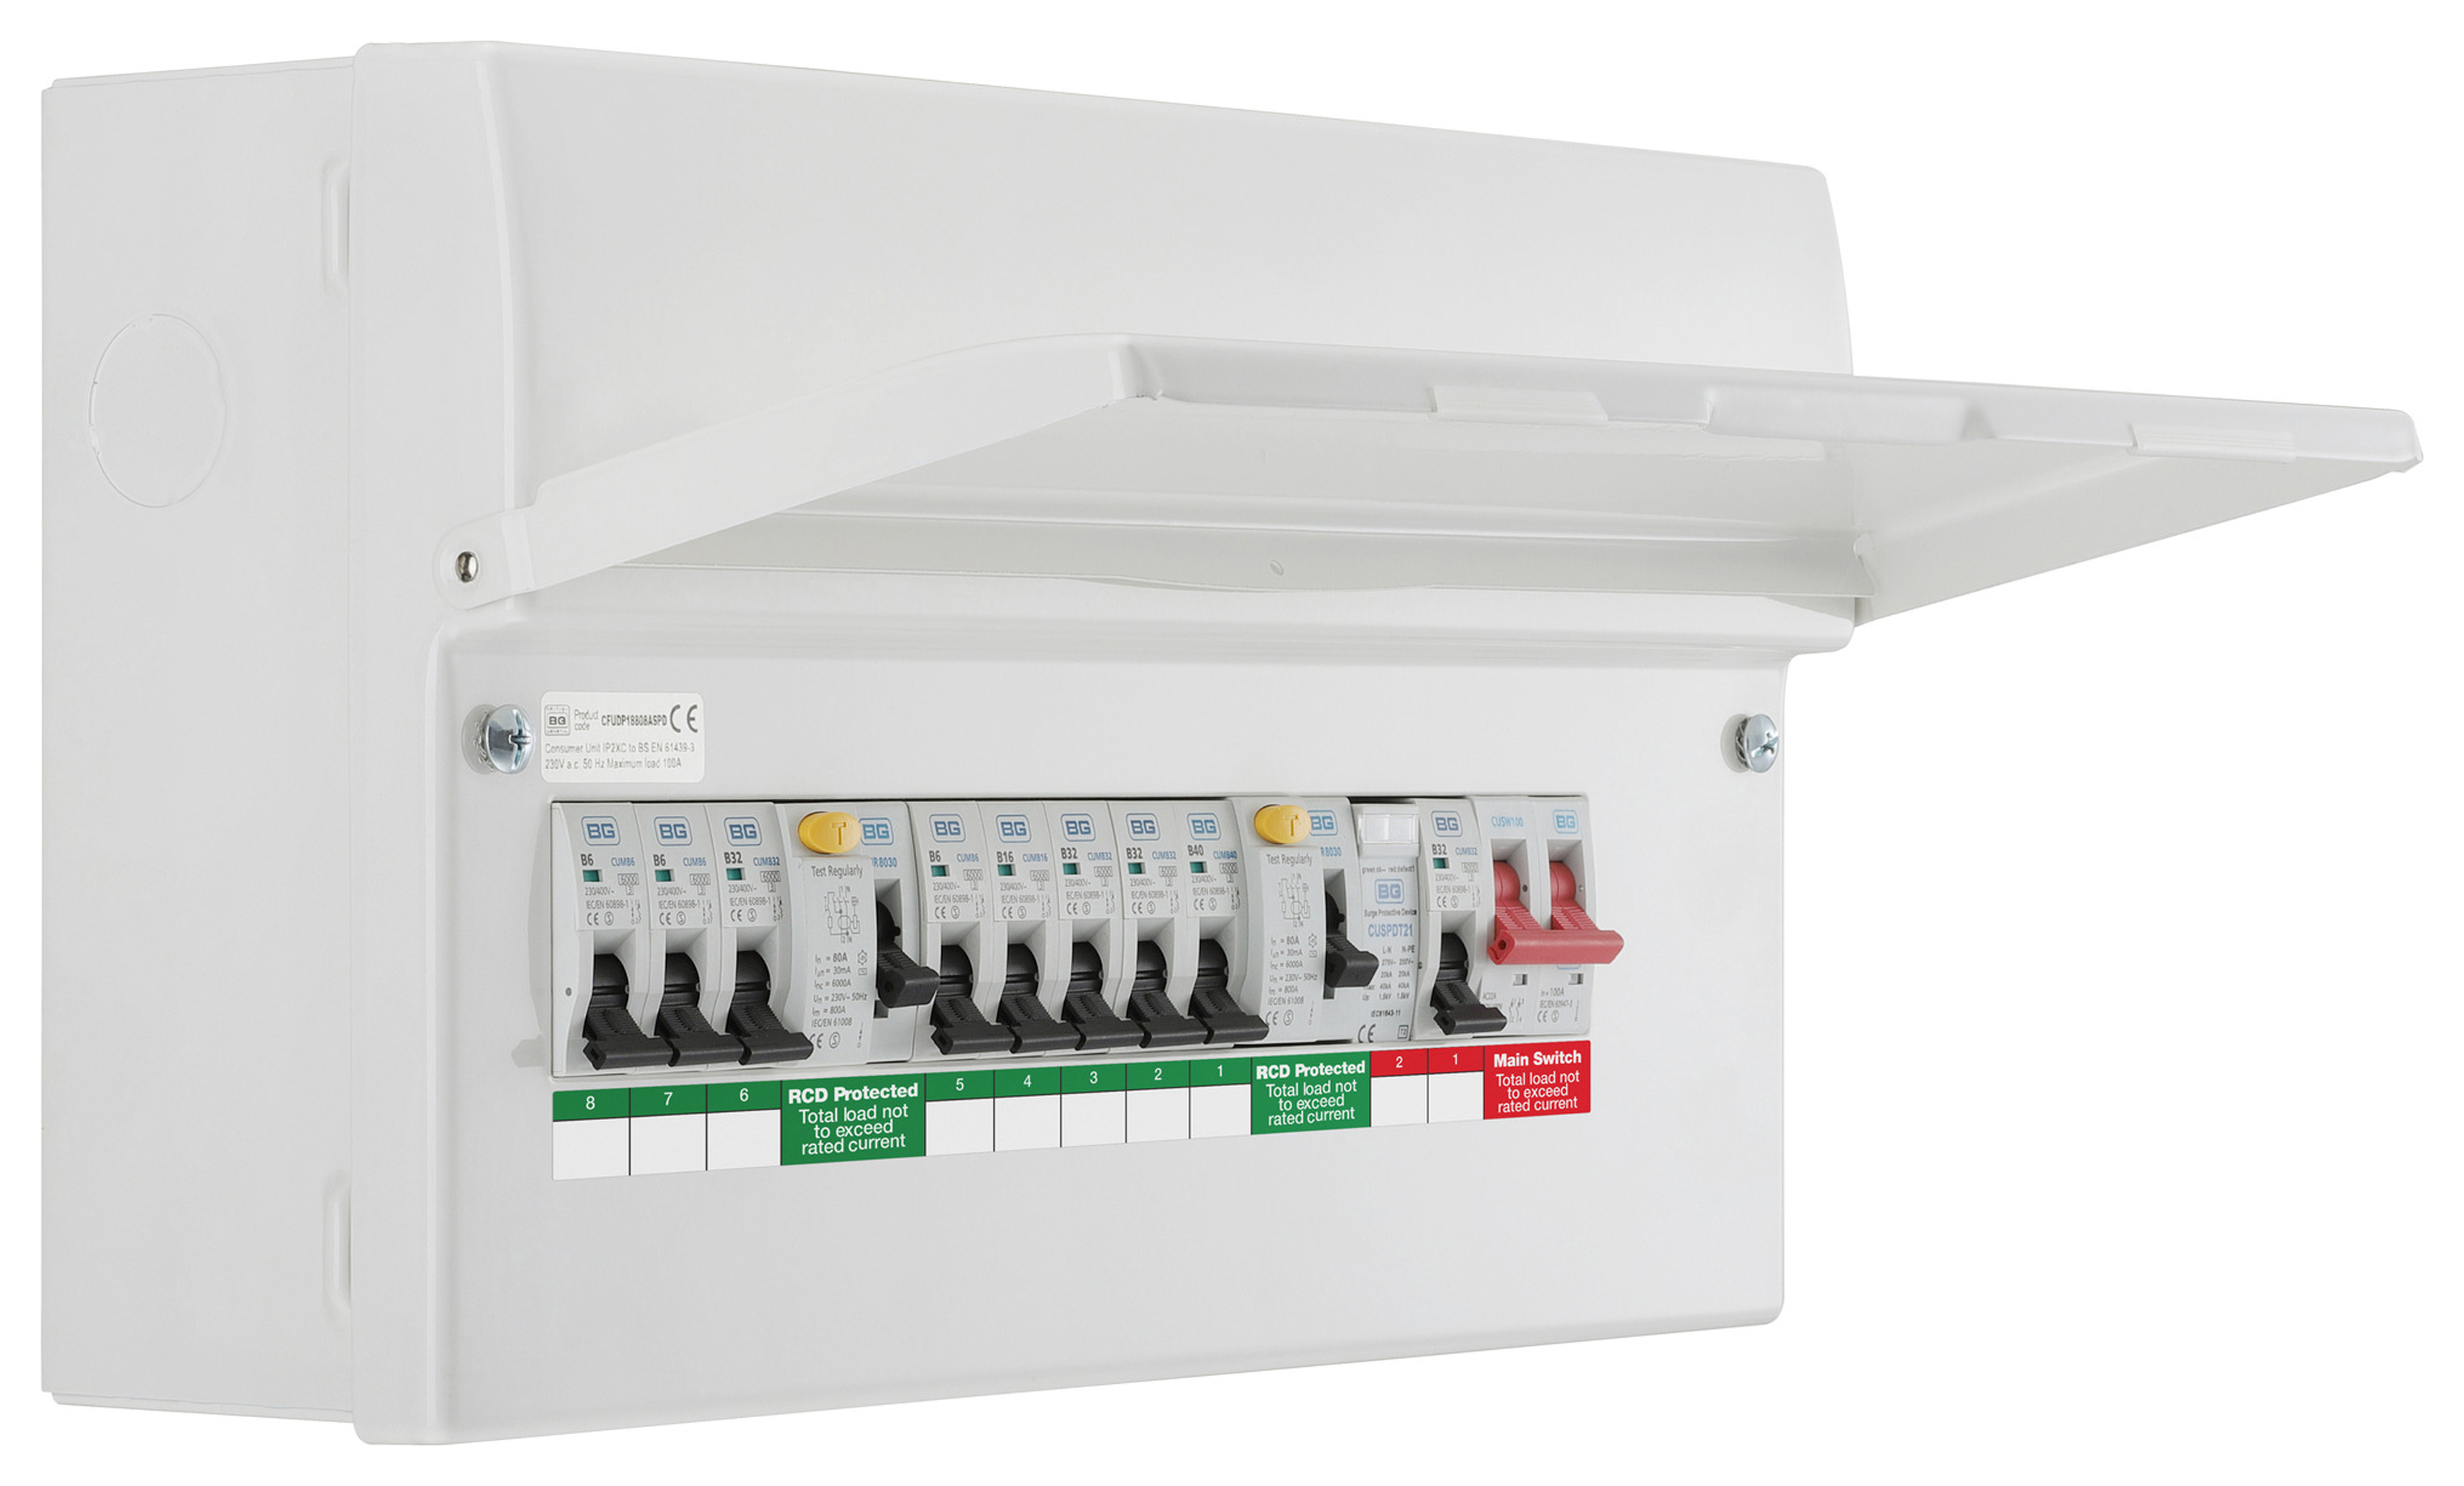 BG Fortress Main Switch 100A 16 module, 8 way, Consumer Unit Populated with 80A/80A Type A RCD, 8 x MCBs, and SPD